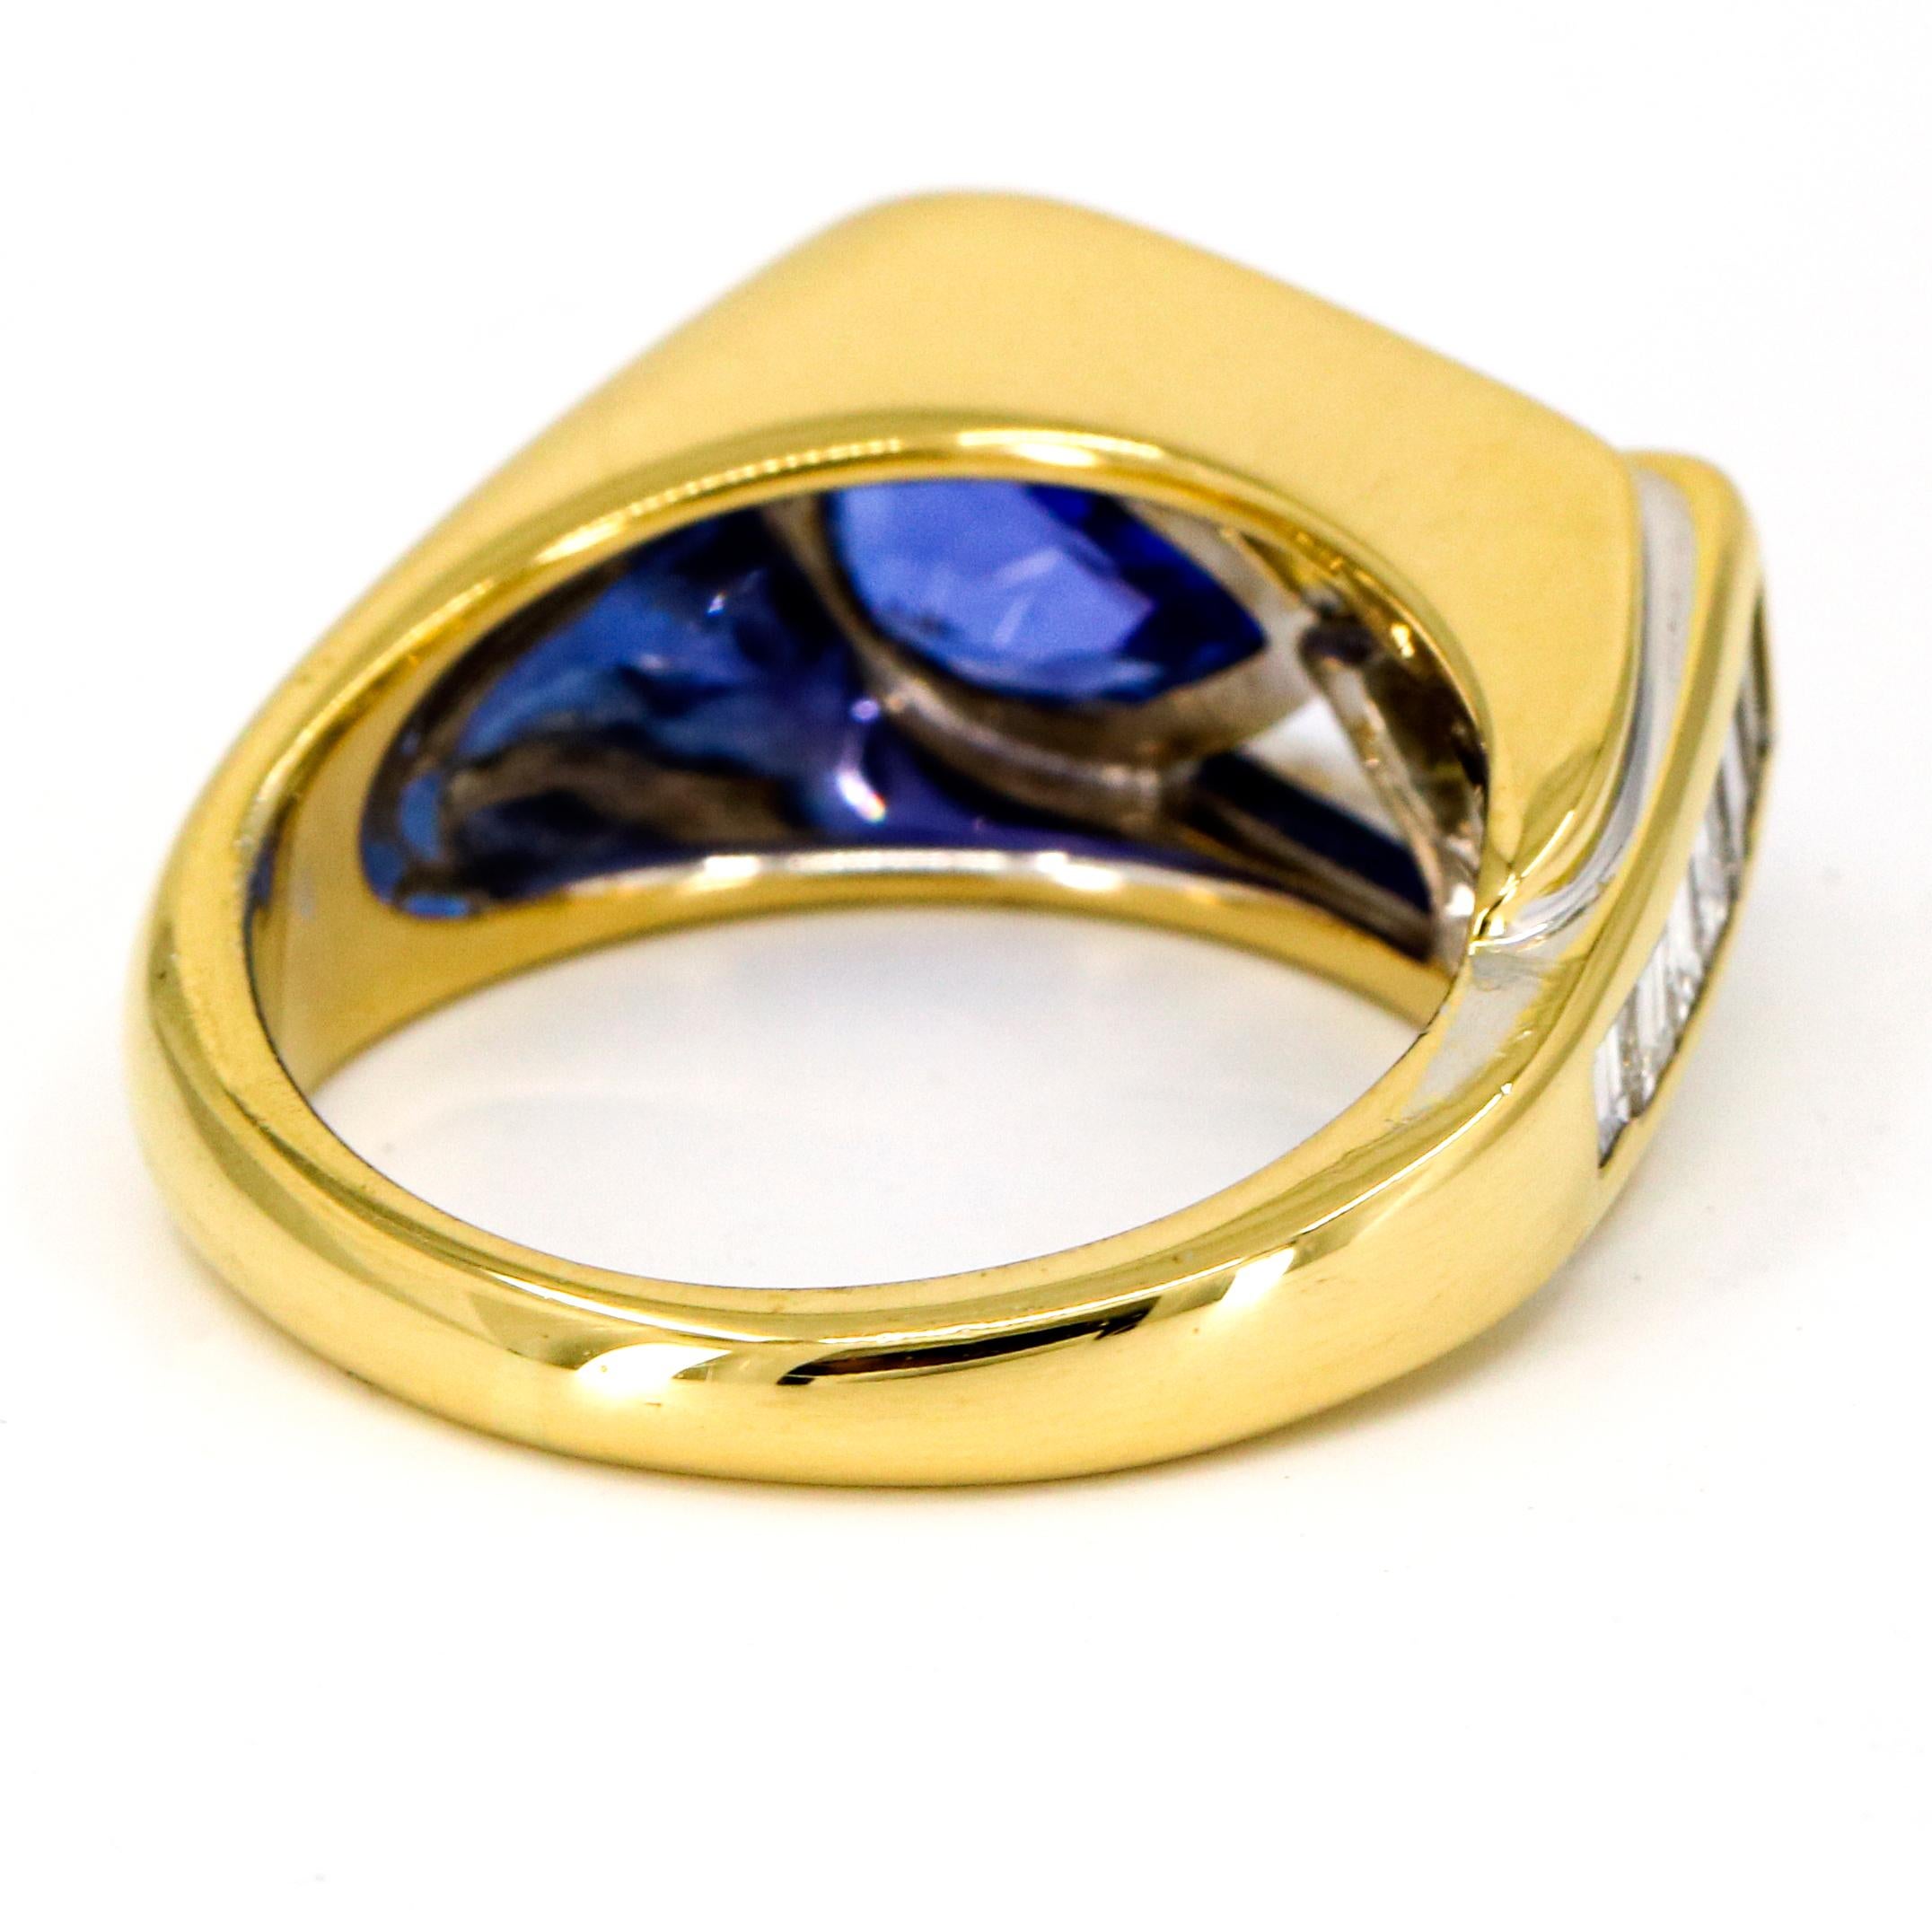 3.35 Carat 18 Karat Yellow Gold Tanzanite Diamond Band Ring In Good Condition For Sale In Fort Lauderdale, FL